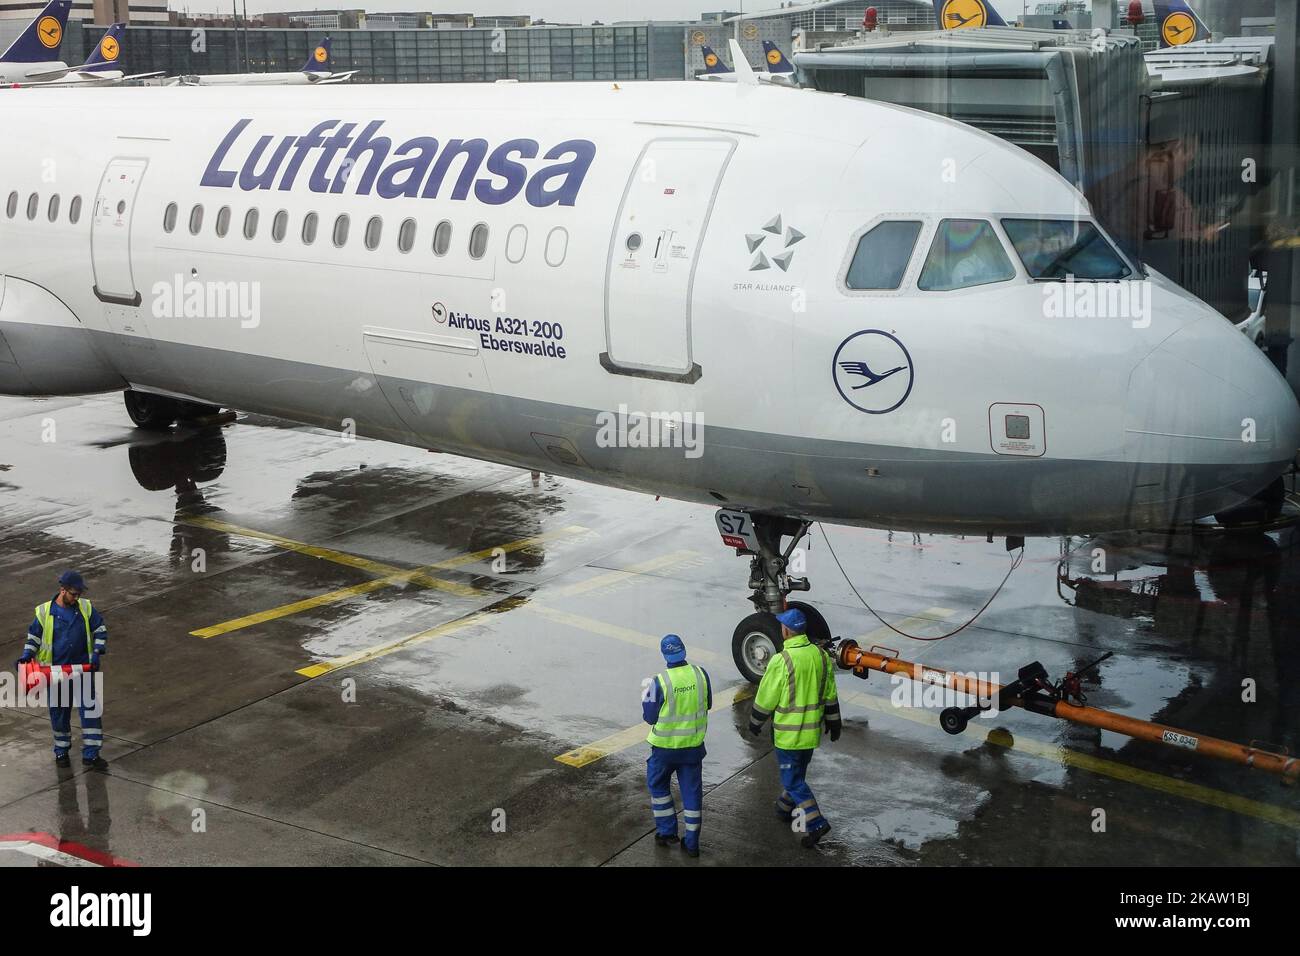 Lufthansa's fleet as seen in Frankfurt Airport in Germany, the primary hub for the airline. Lufthansa is the world's 10th largest airline by passengers carried in 2016. The airline owns a fleeet of 273 aircrafts and 130 orders. Lufthansa both operates the super jumbo jets Airbus A380 and Boeing 747-8 and 747-400. Lufthansa is also the launch customer of the Airbus A320neo series and already flies the A350. The airline is one of the founder members of Star Alliance aviation affiliation. Frankfurt airport is an international airport connecting the German city to the world (Photo by Nicolas Econo Stock Photo